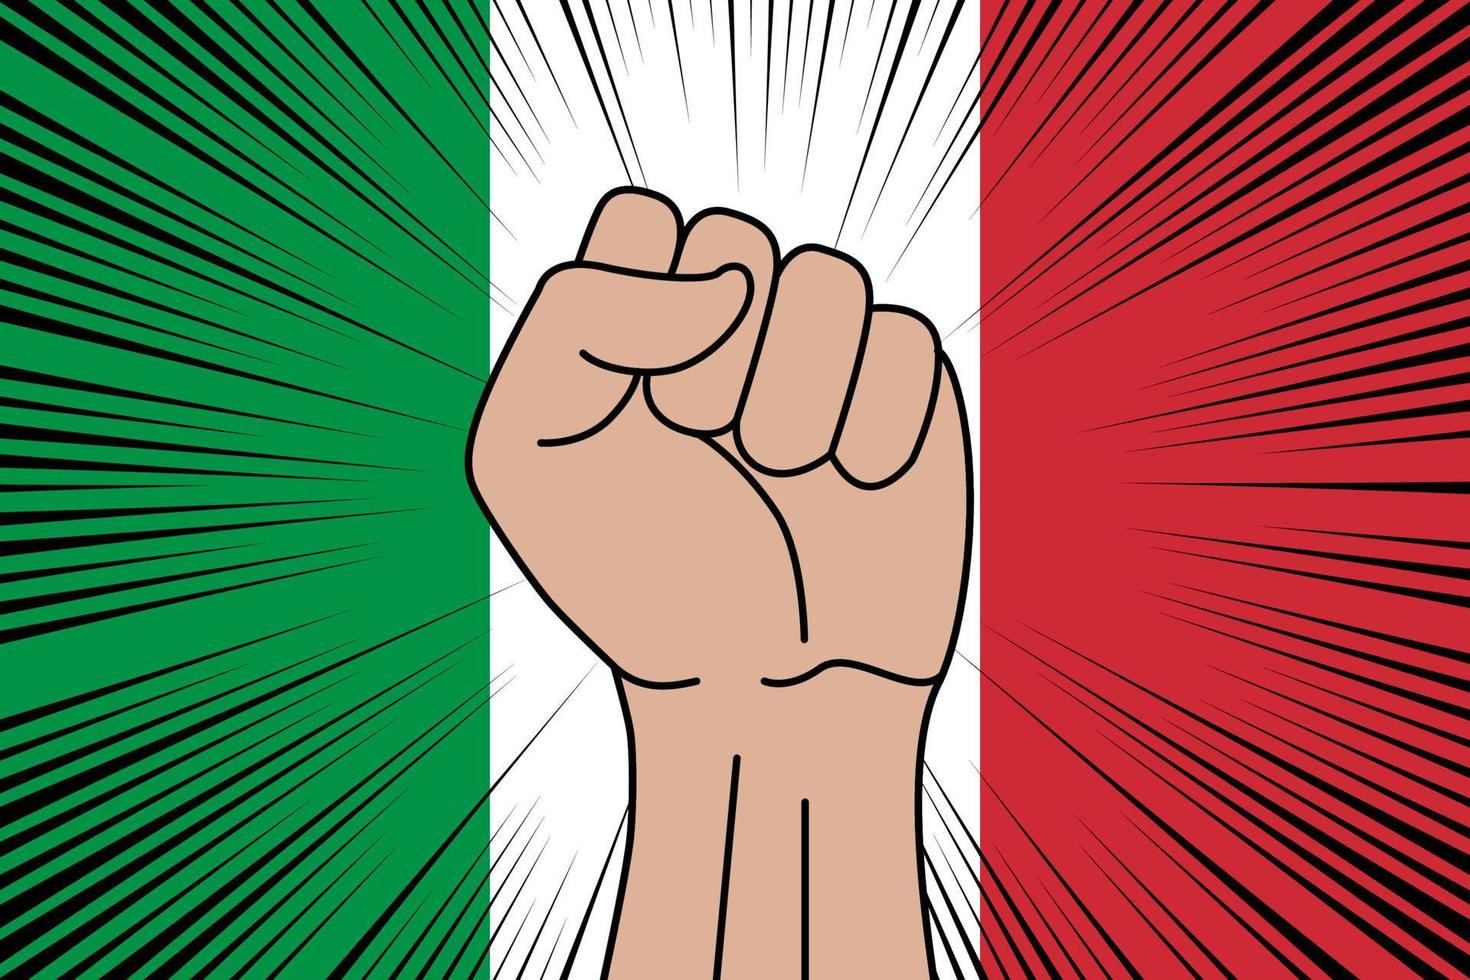 Human fist clenched symbol on flag of Italy vector